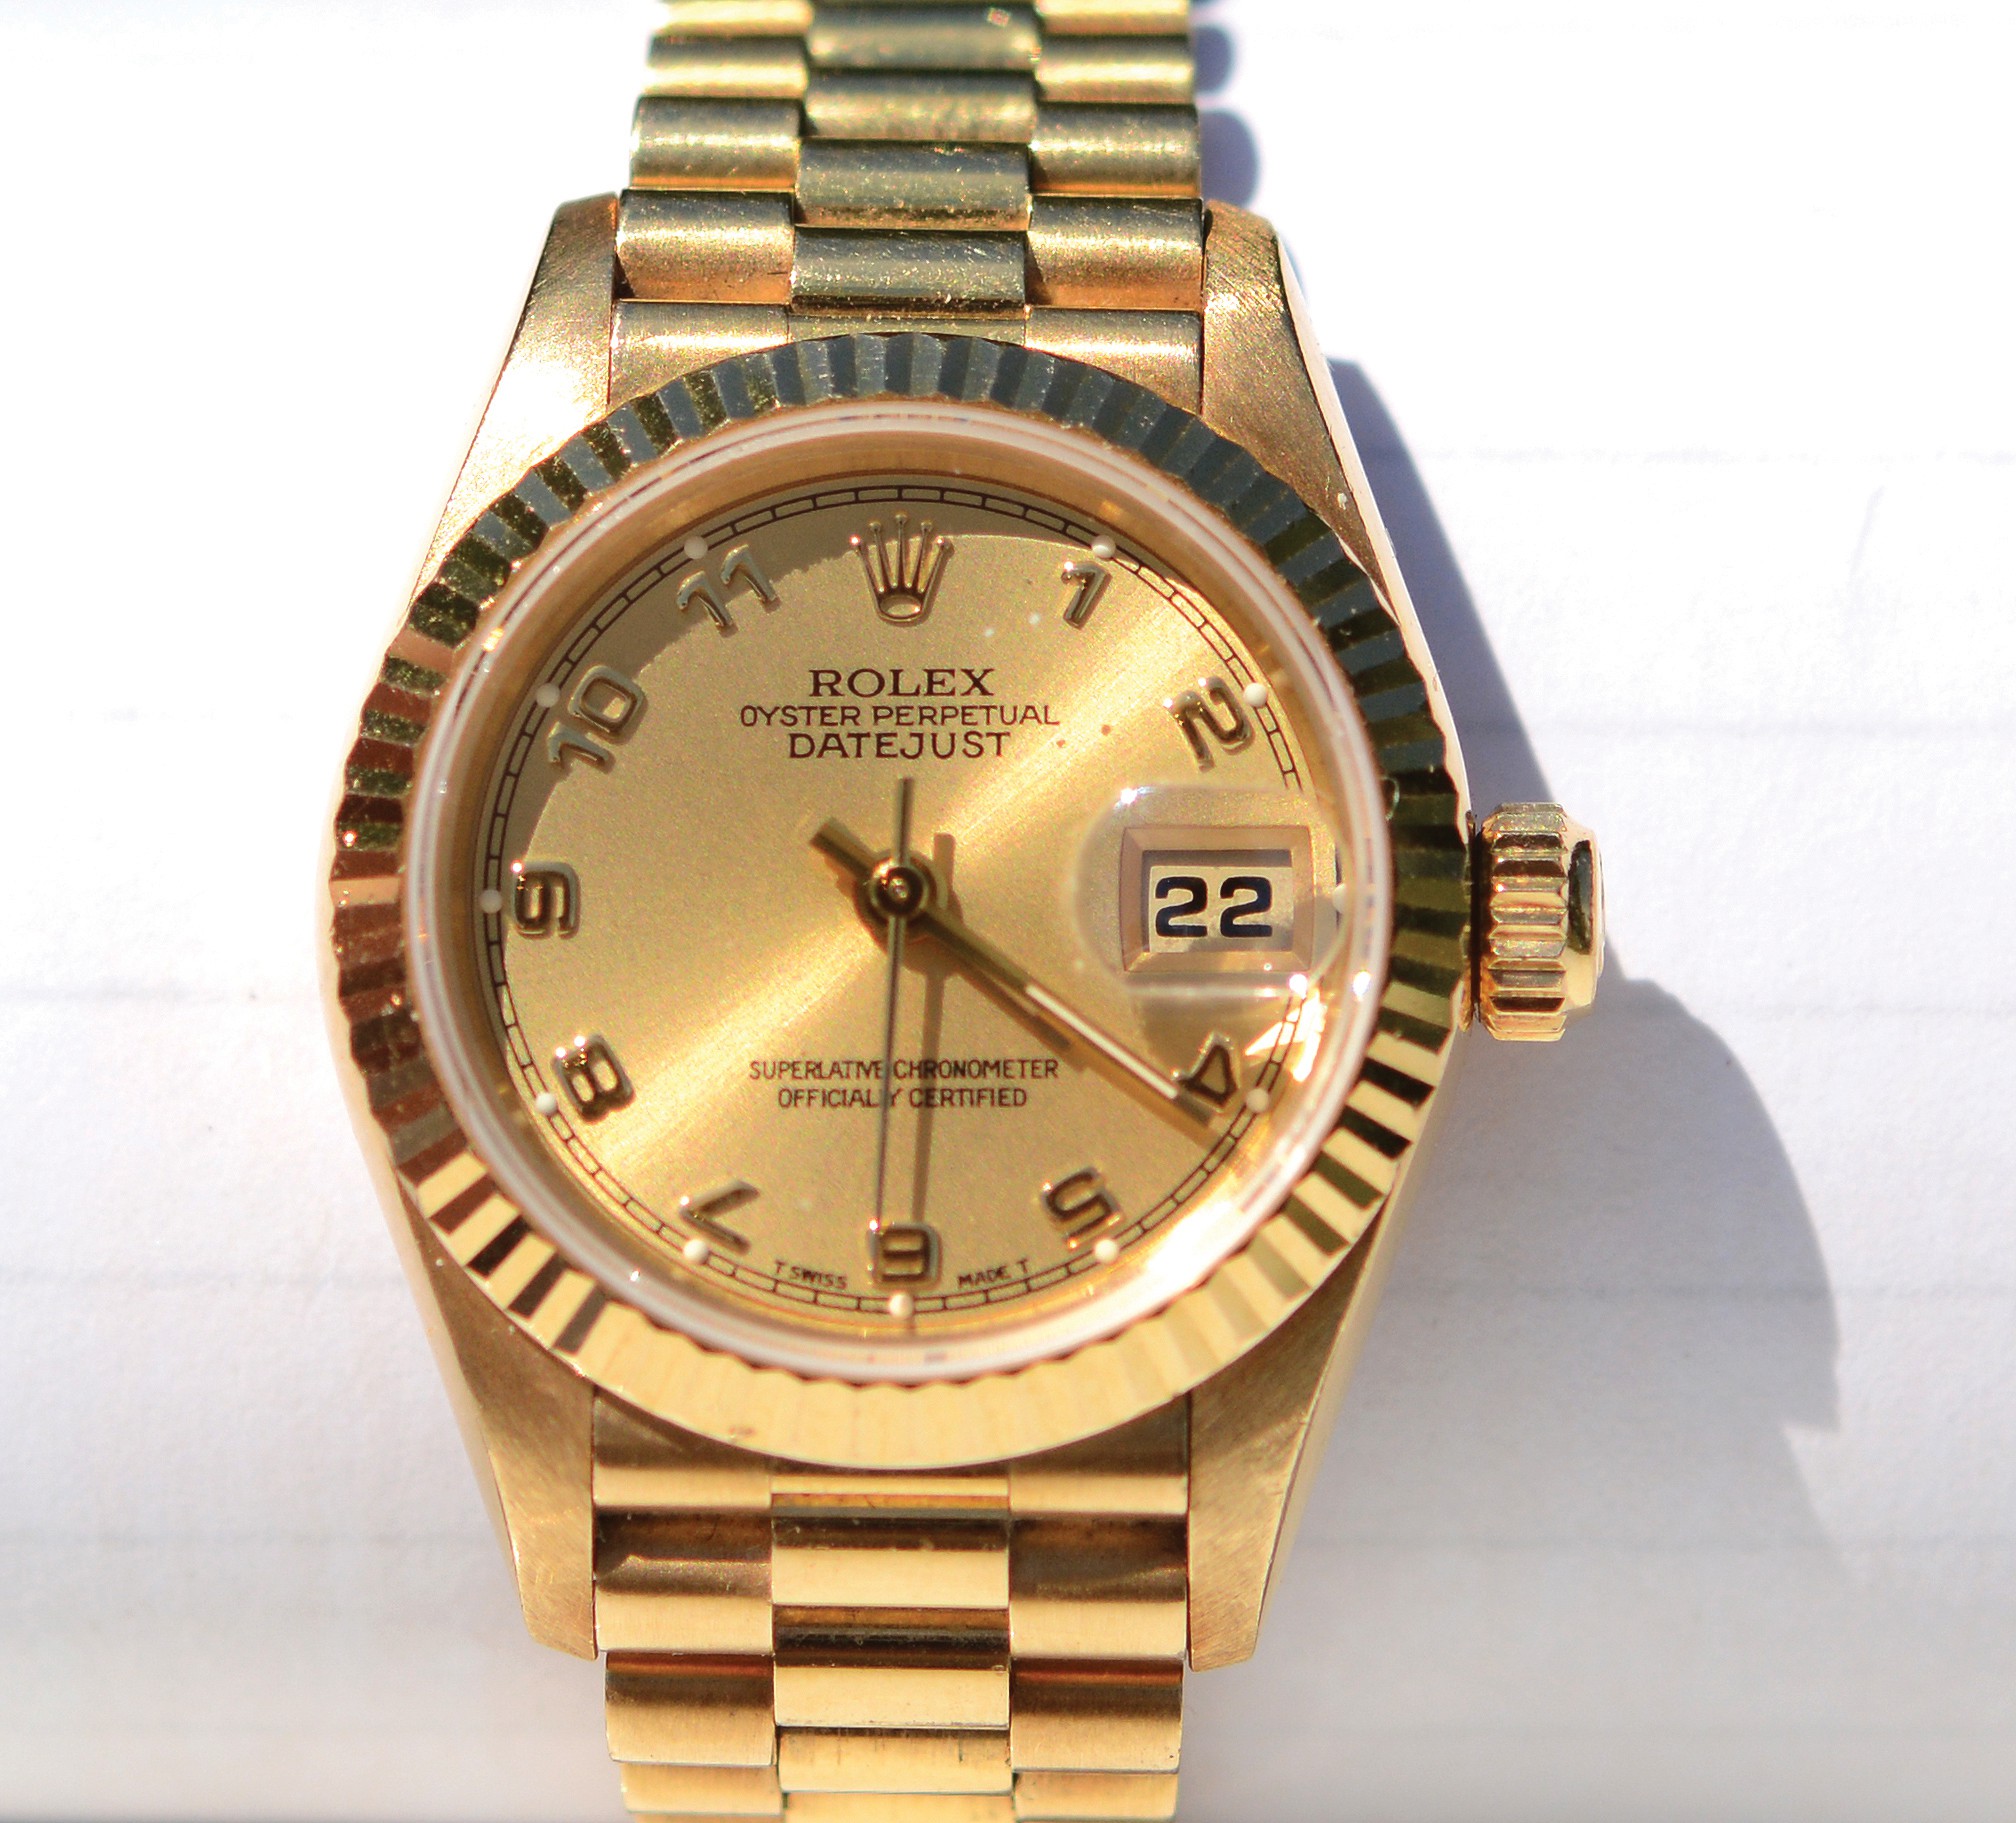 'The Rolex Lady President' in 18kt yellow gold